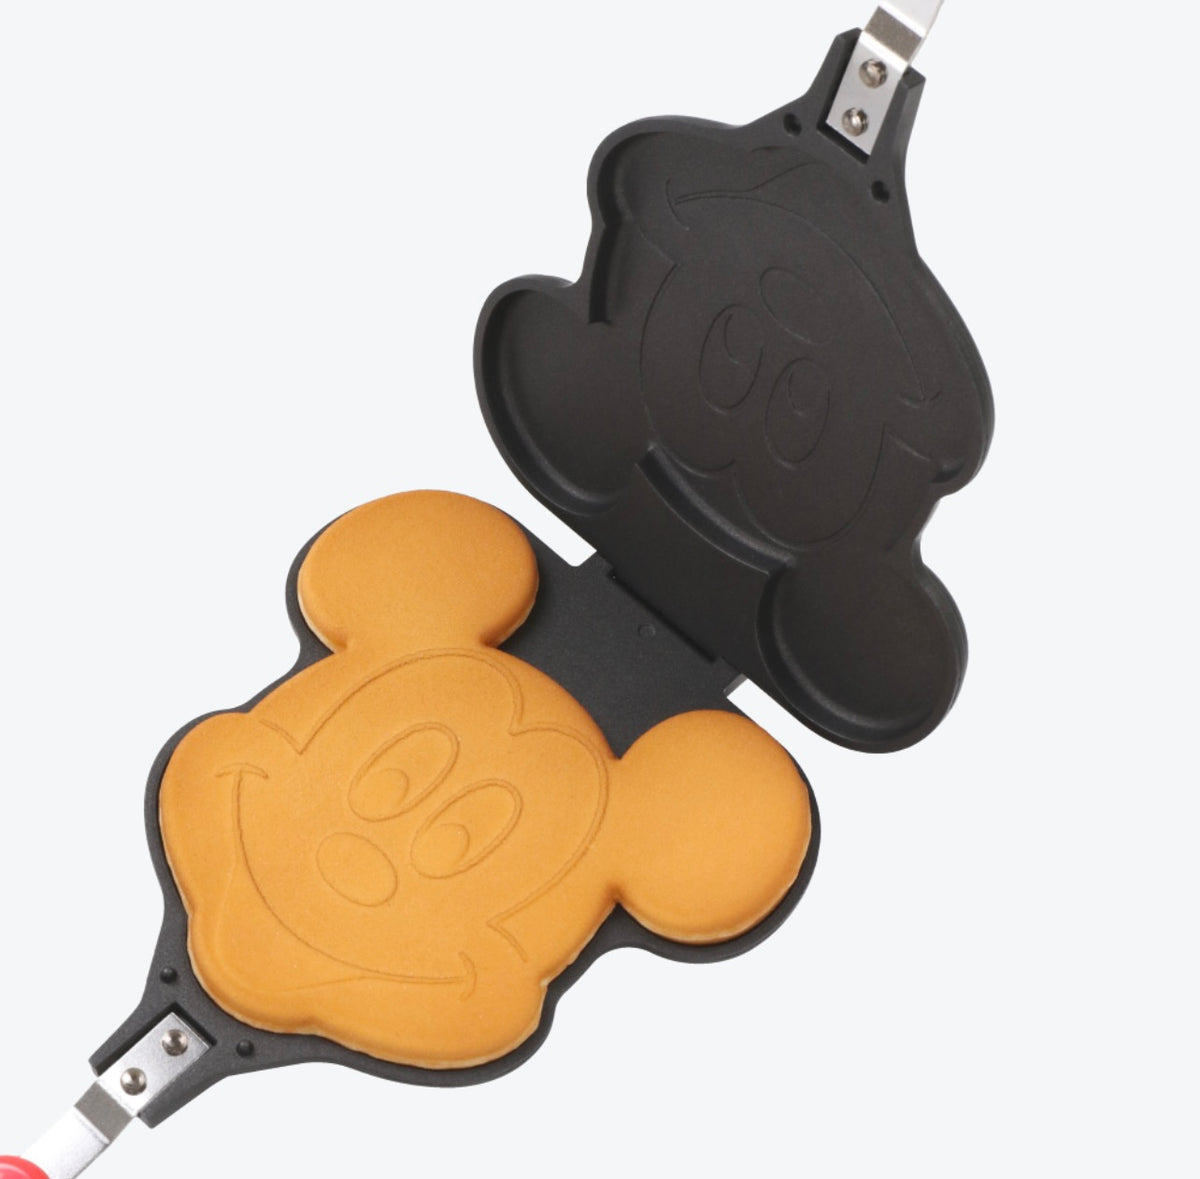 Disney Minnie Mouse Face Waffle Maker